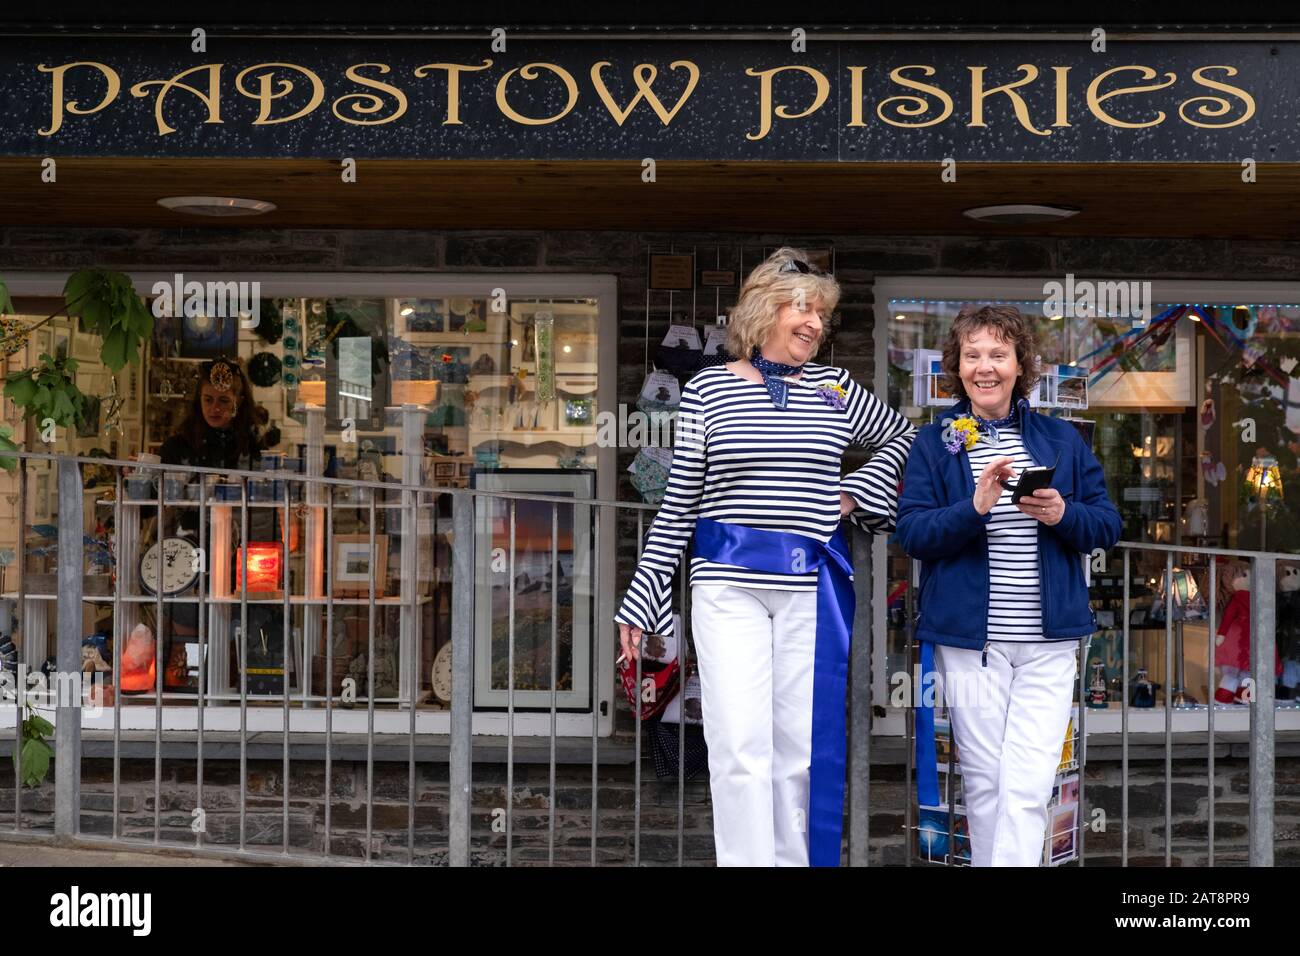 Two women wearing blue ribbons outside Padstow Piskies at he Obby Oss procession, Padstow, Cornwall, UK Stock Photo